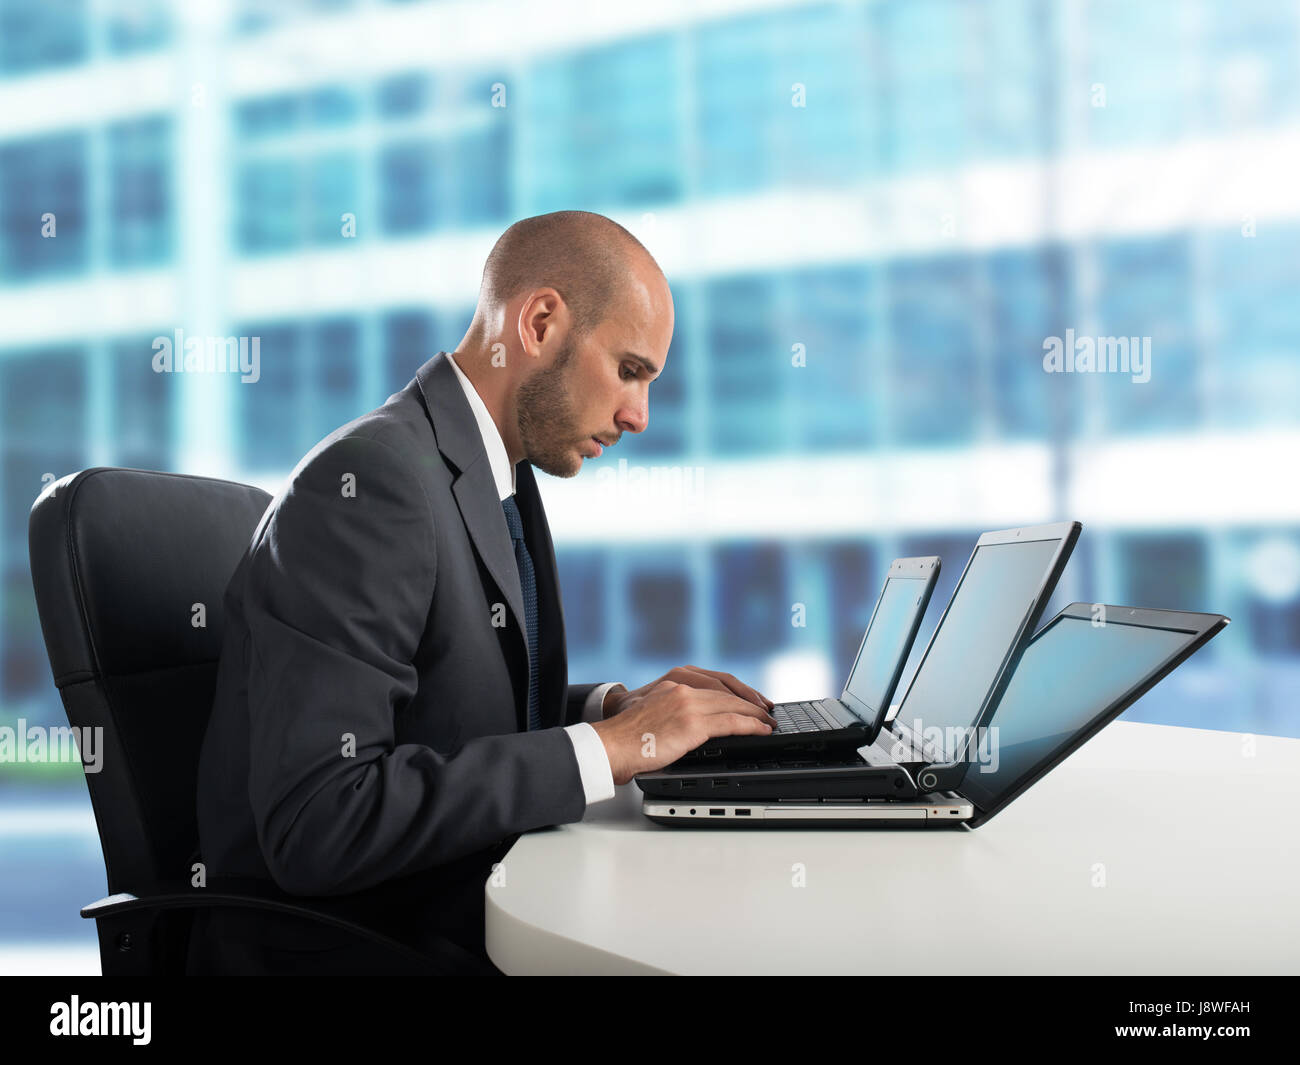 Fatigue and stress in the office Stock Photo